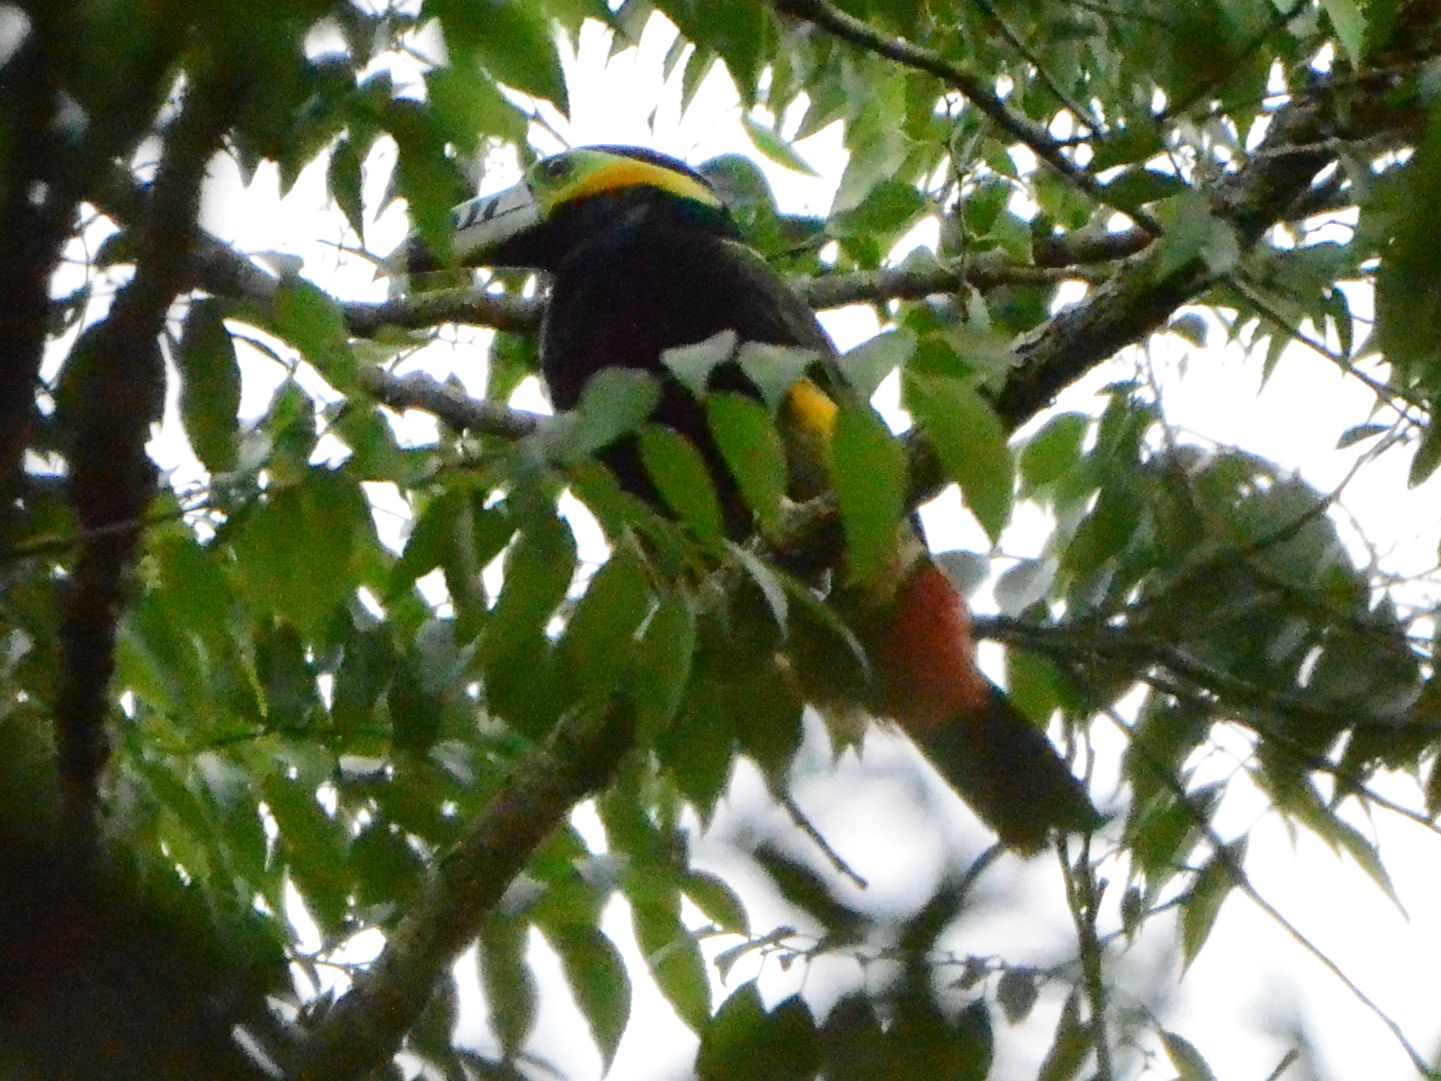 Click picture to see more Spot-billed Toucanets.